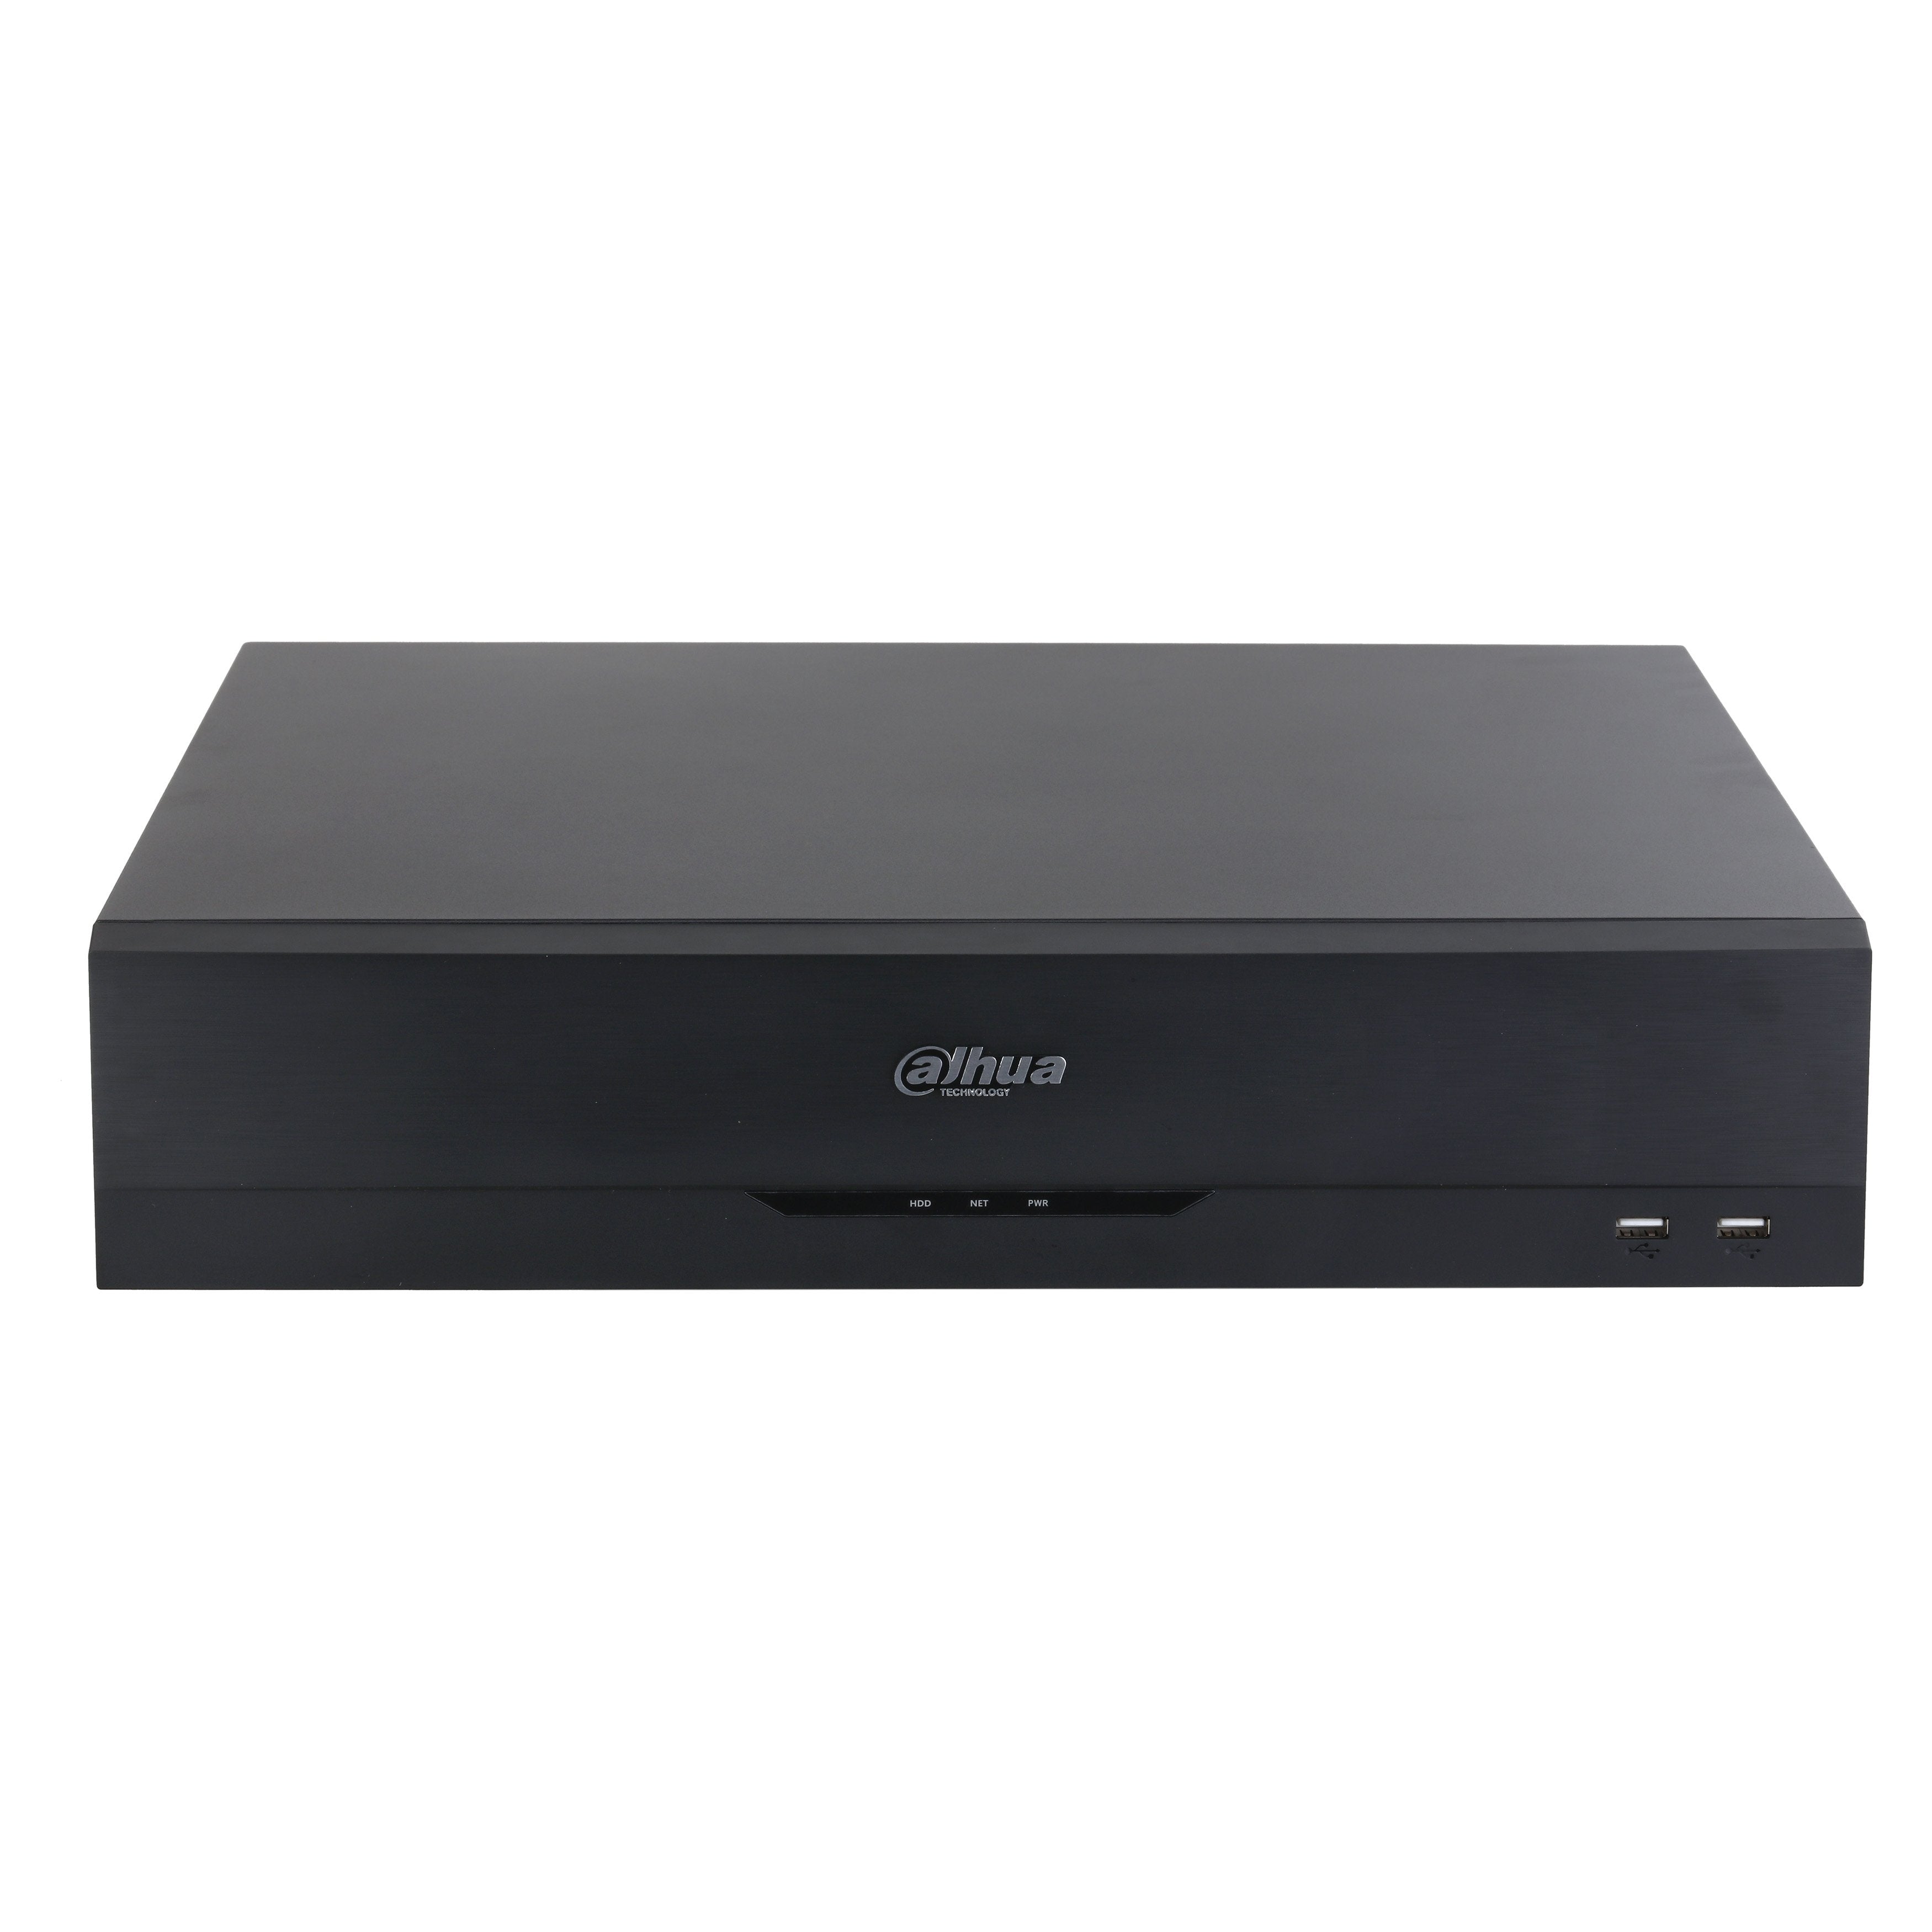 Dahua 64 Channel NVR, WizSense AI Series, 1.5RU, 384MB (200MB With AI Function Enabled), 2 x Gigabit NIC, 8 x HDD **NO POE PORTS OR HDD INSTALLED**